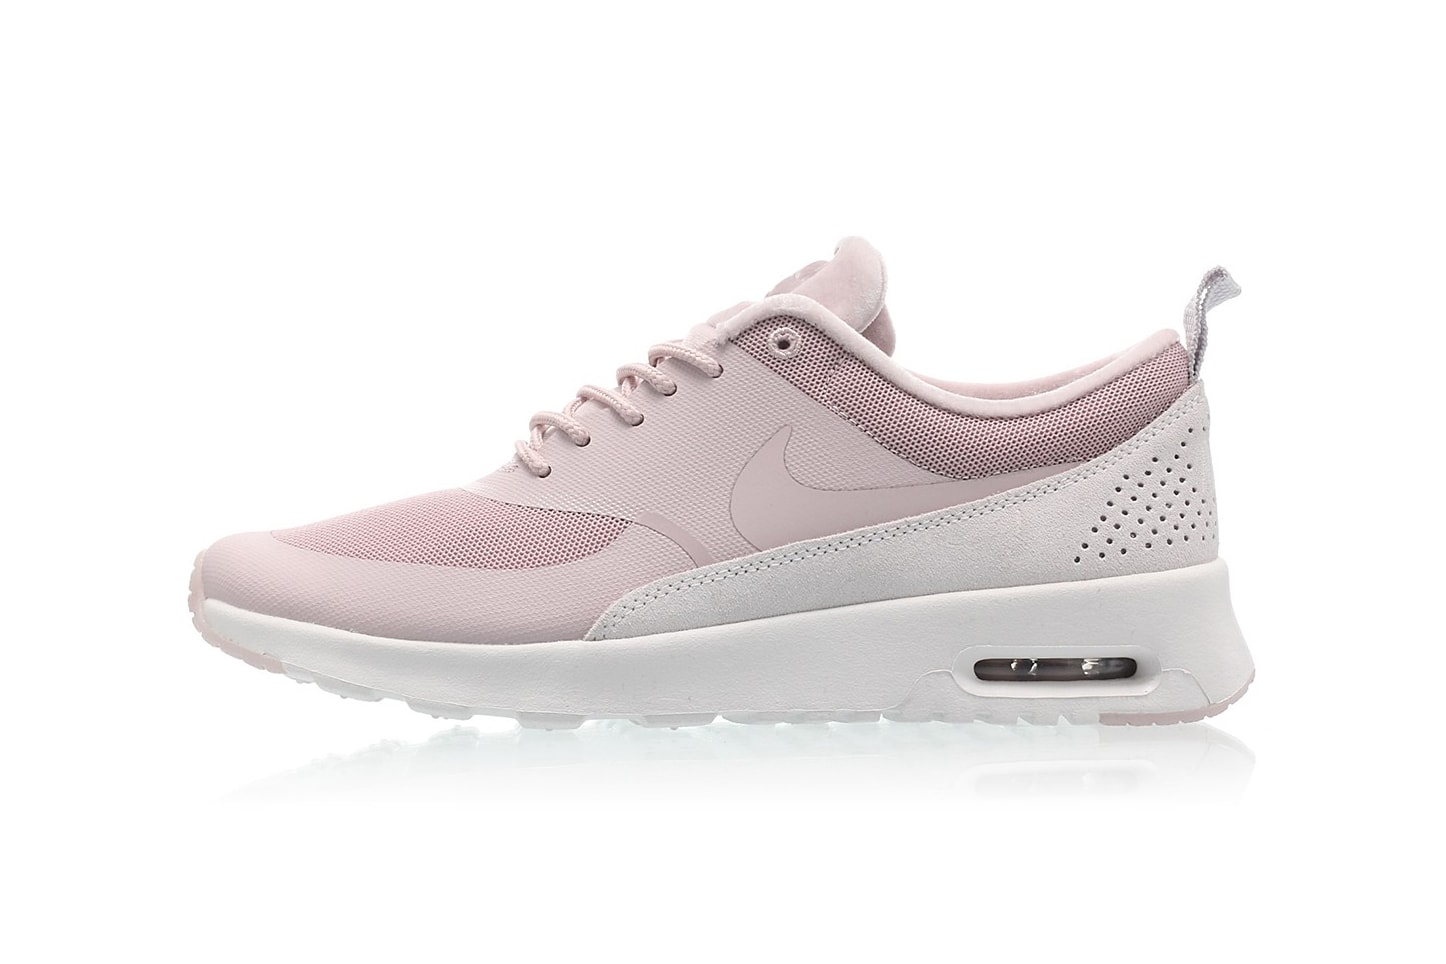 Nike Air Max Thea LX in Particle Rose Pink |